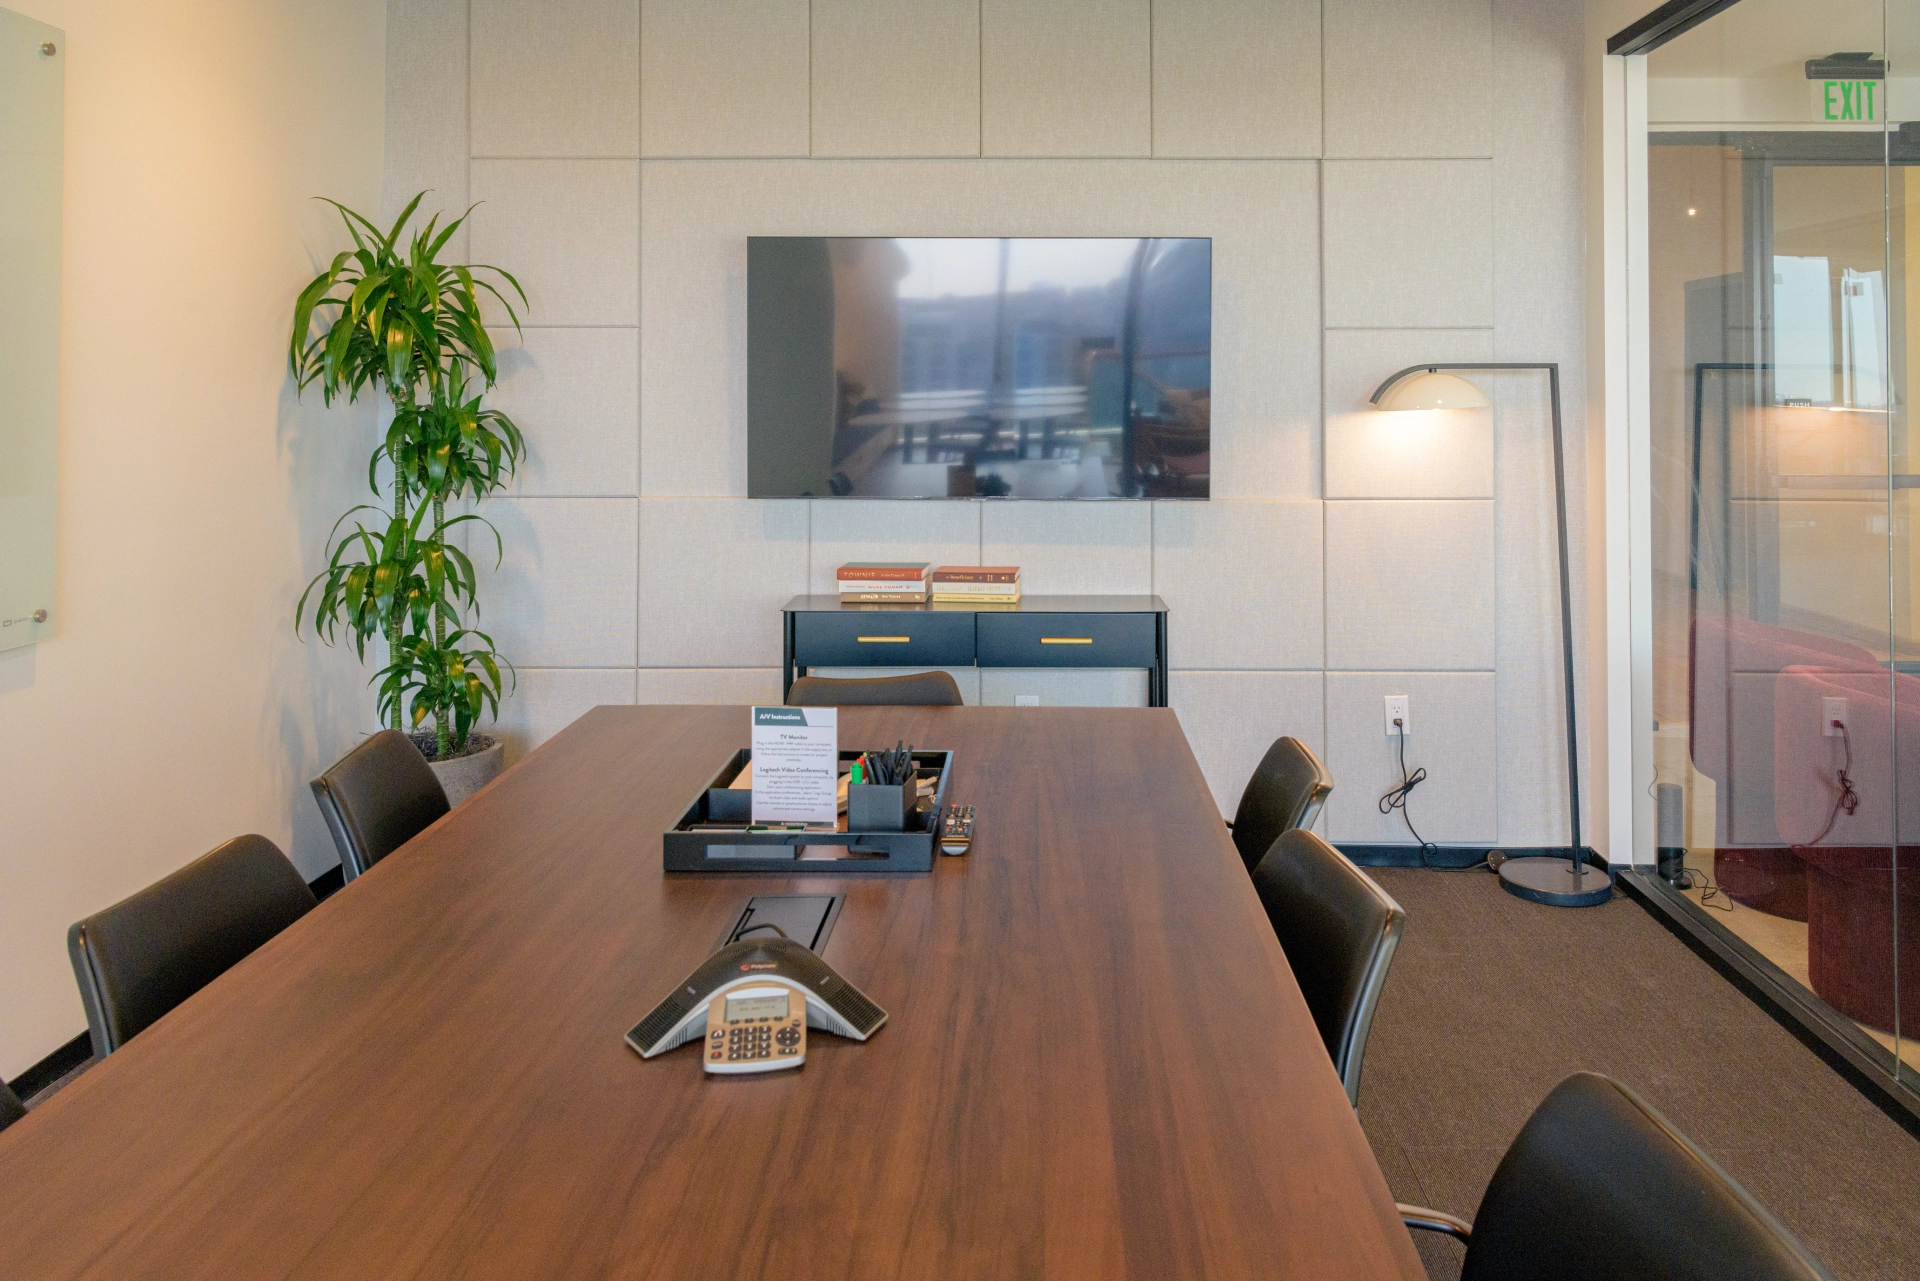 A workspace table in a meeting room.